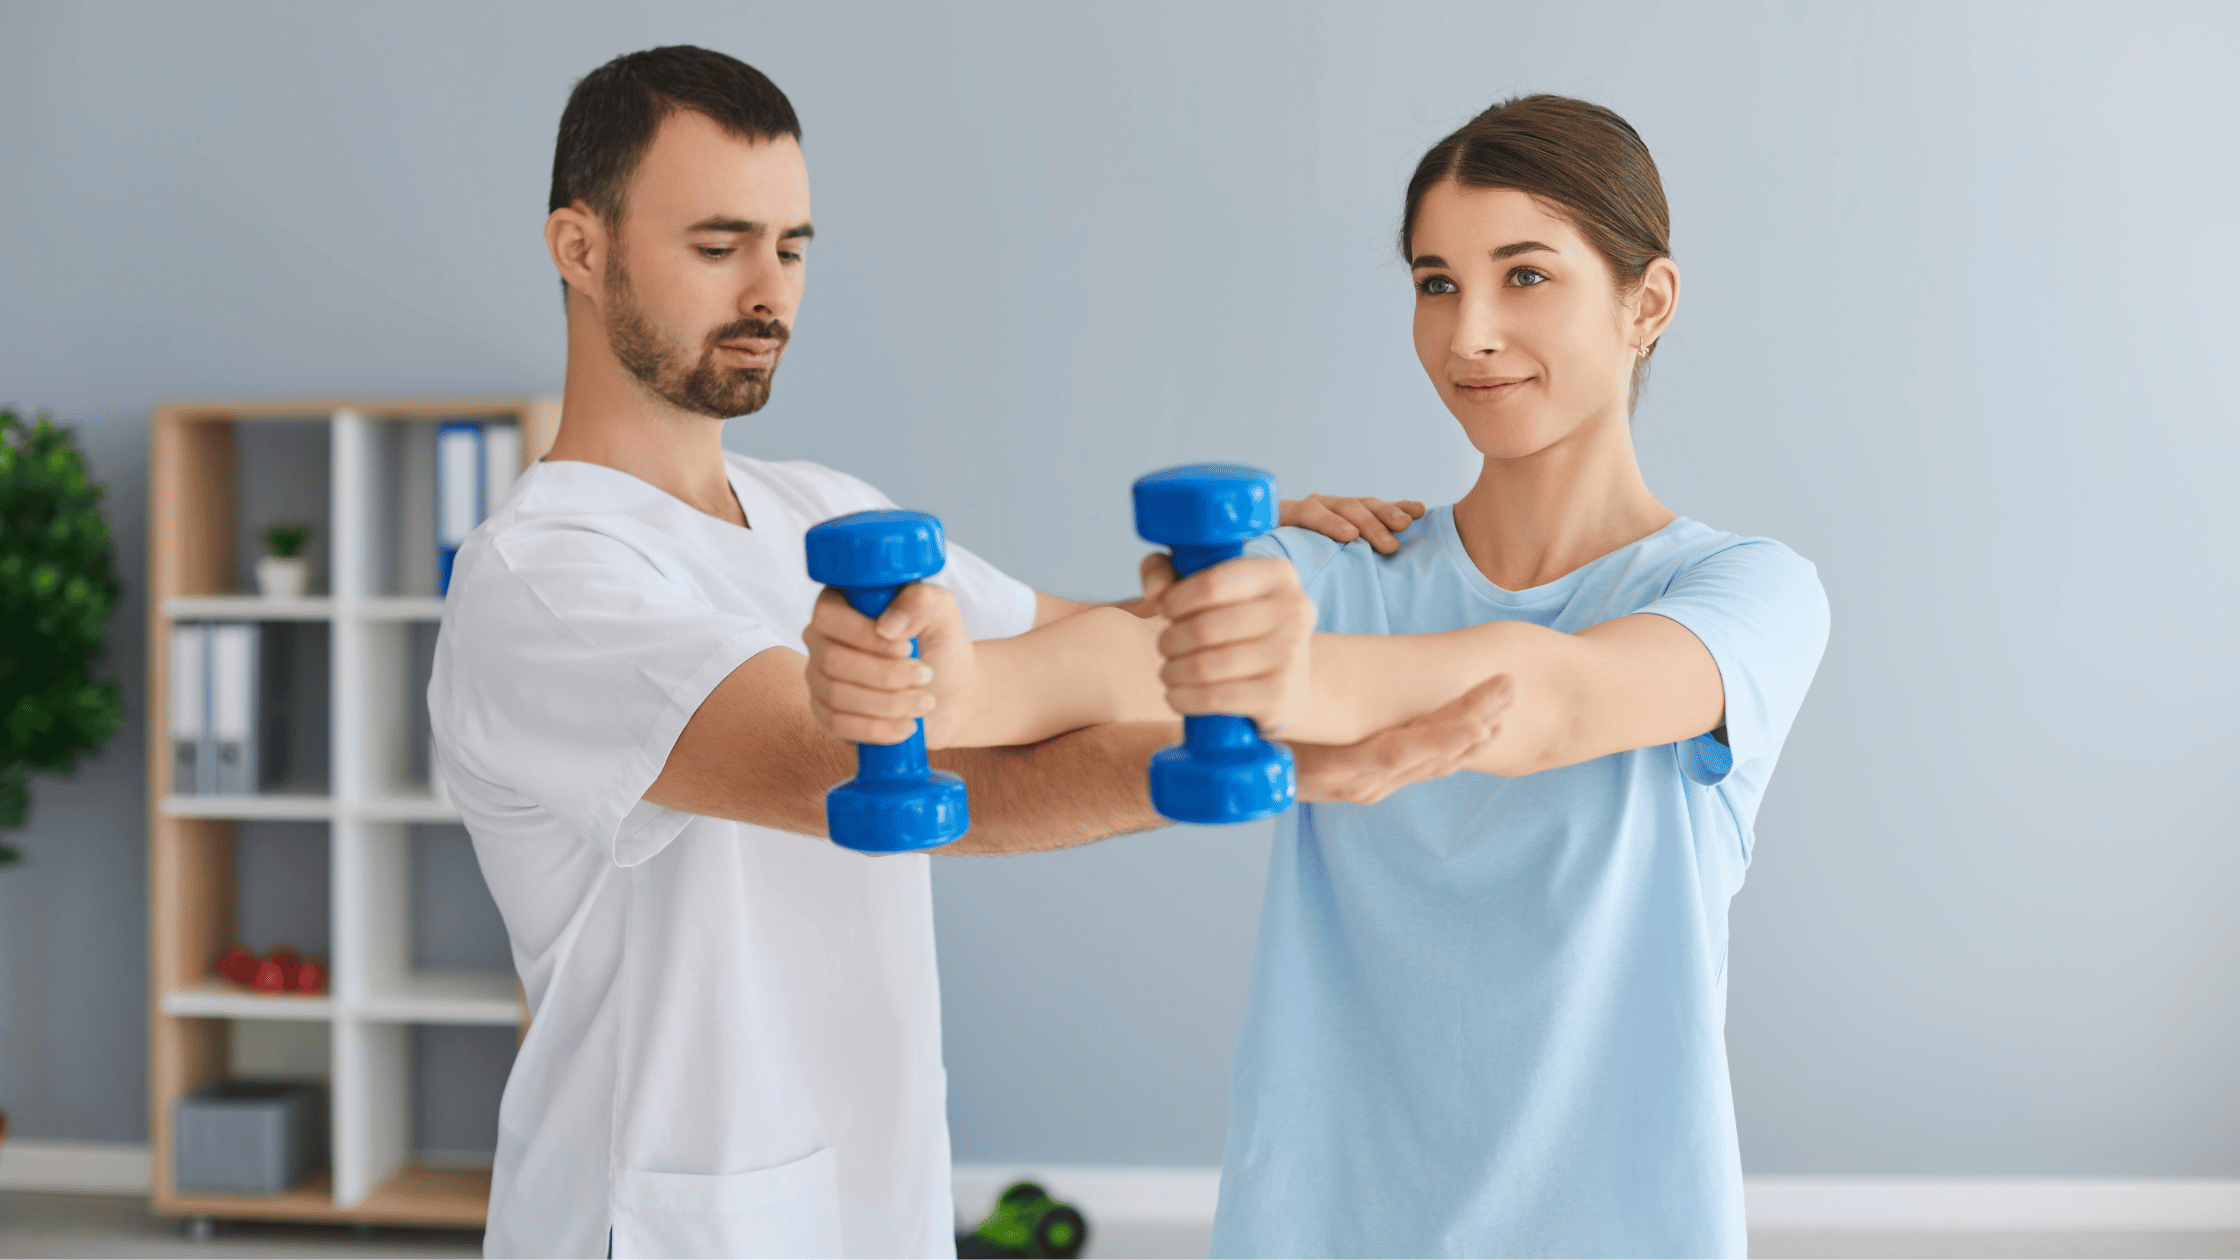 What Are the Benefits of Physical Therapy for Chronic Pain?